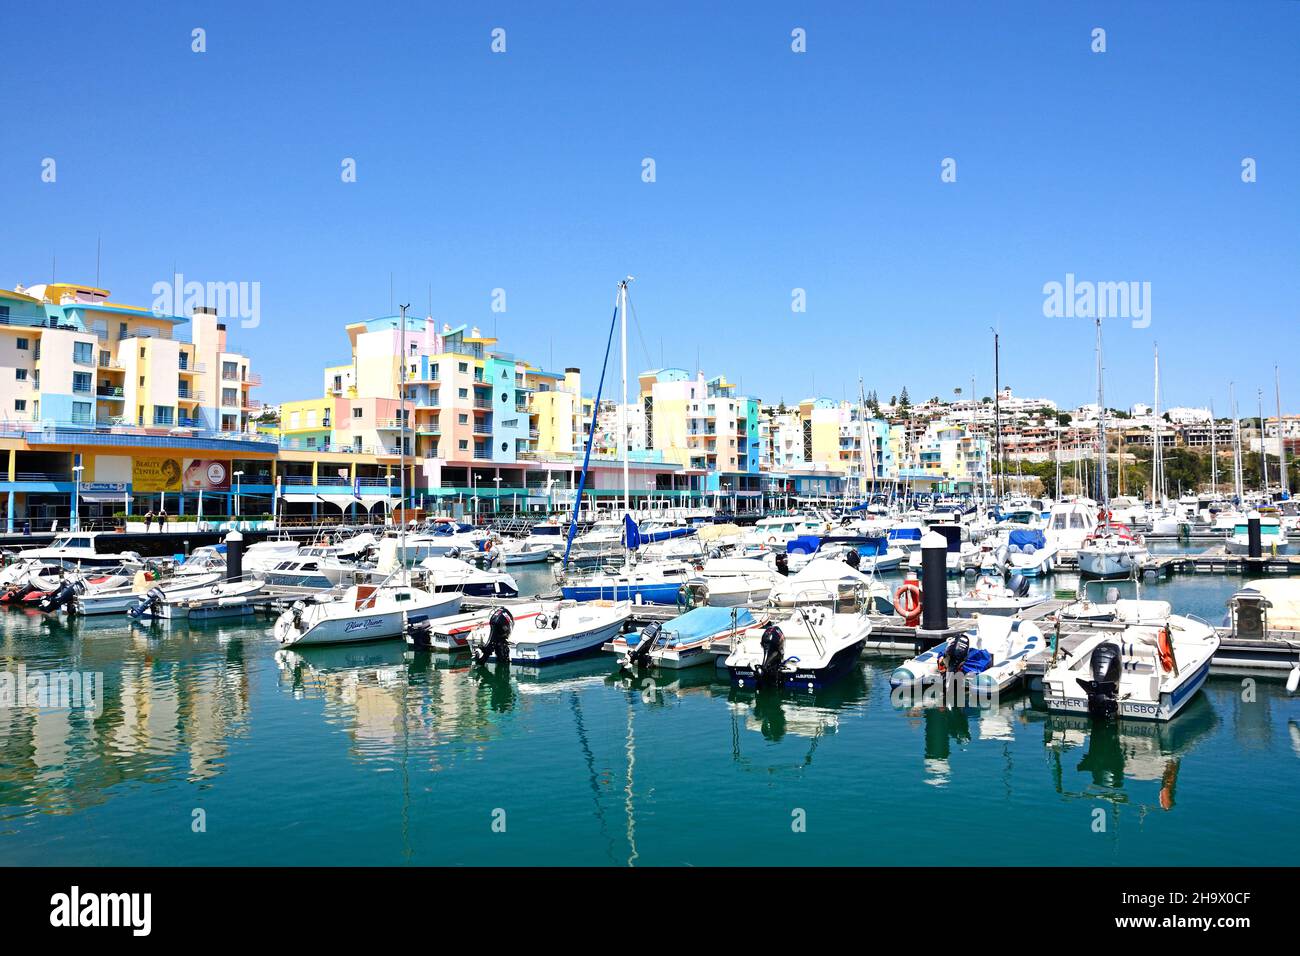 Boats and yachts moored in the marina with buildings to the rear, Albufeira, Algarve, Portugal, Europe. Stock Photo